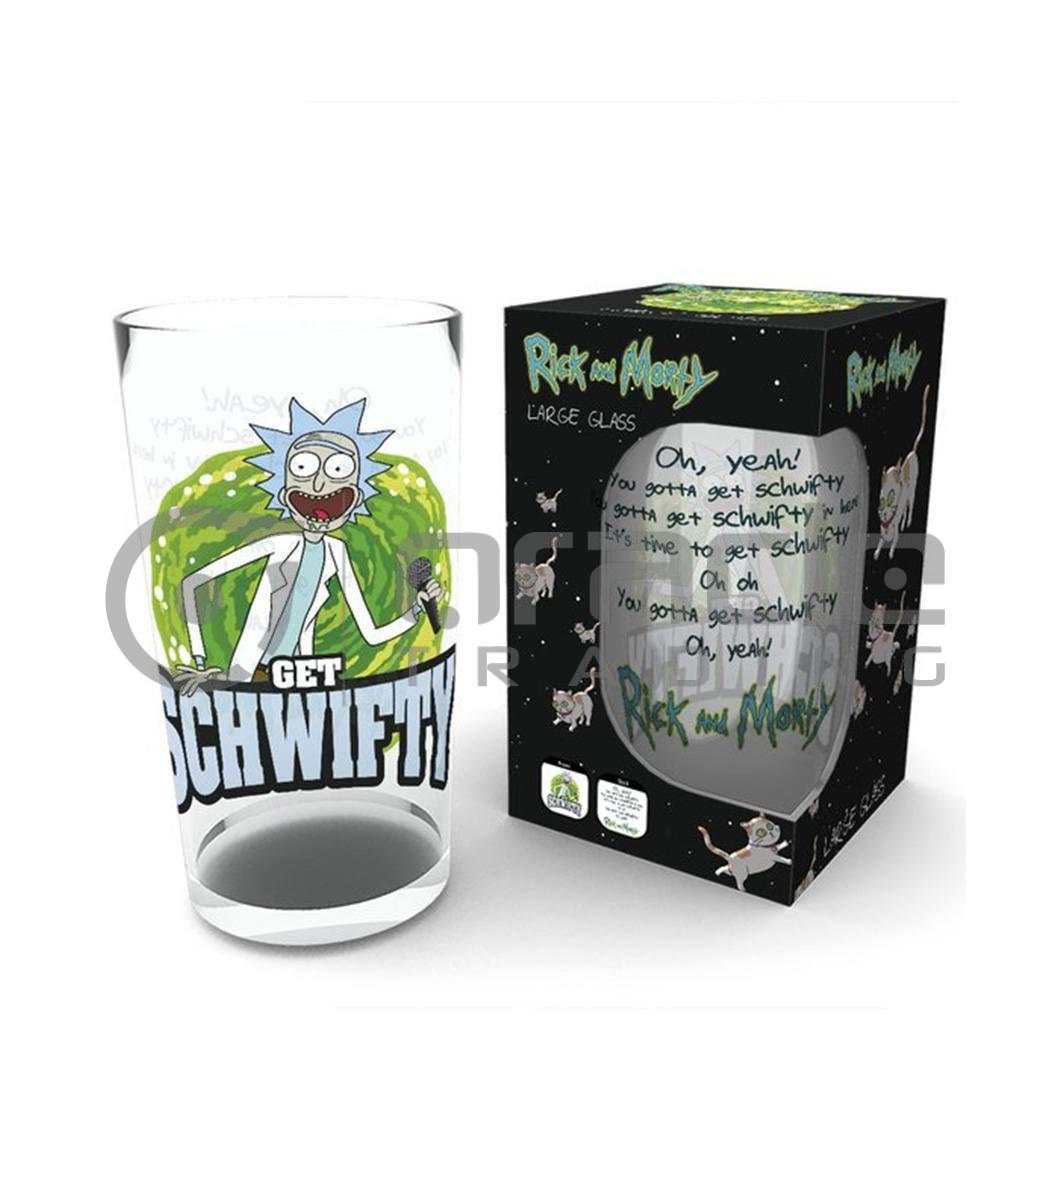 Rick & Morty Large Glass - Get Schwifty